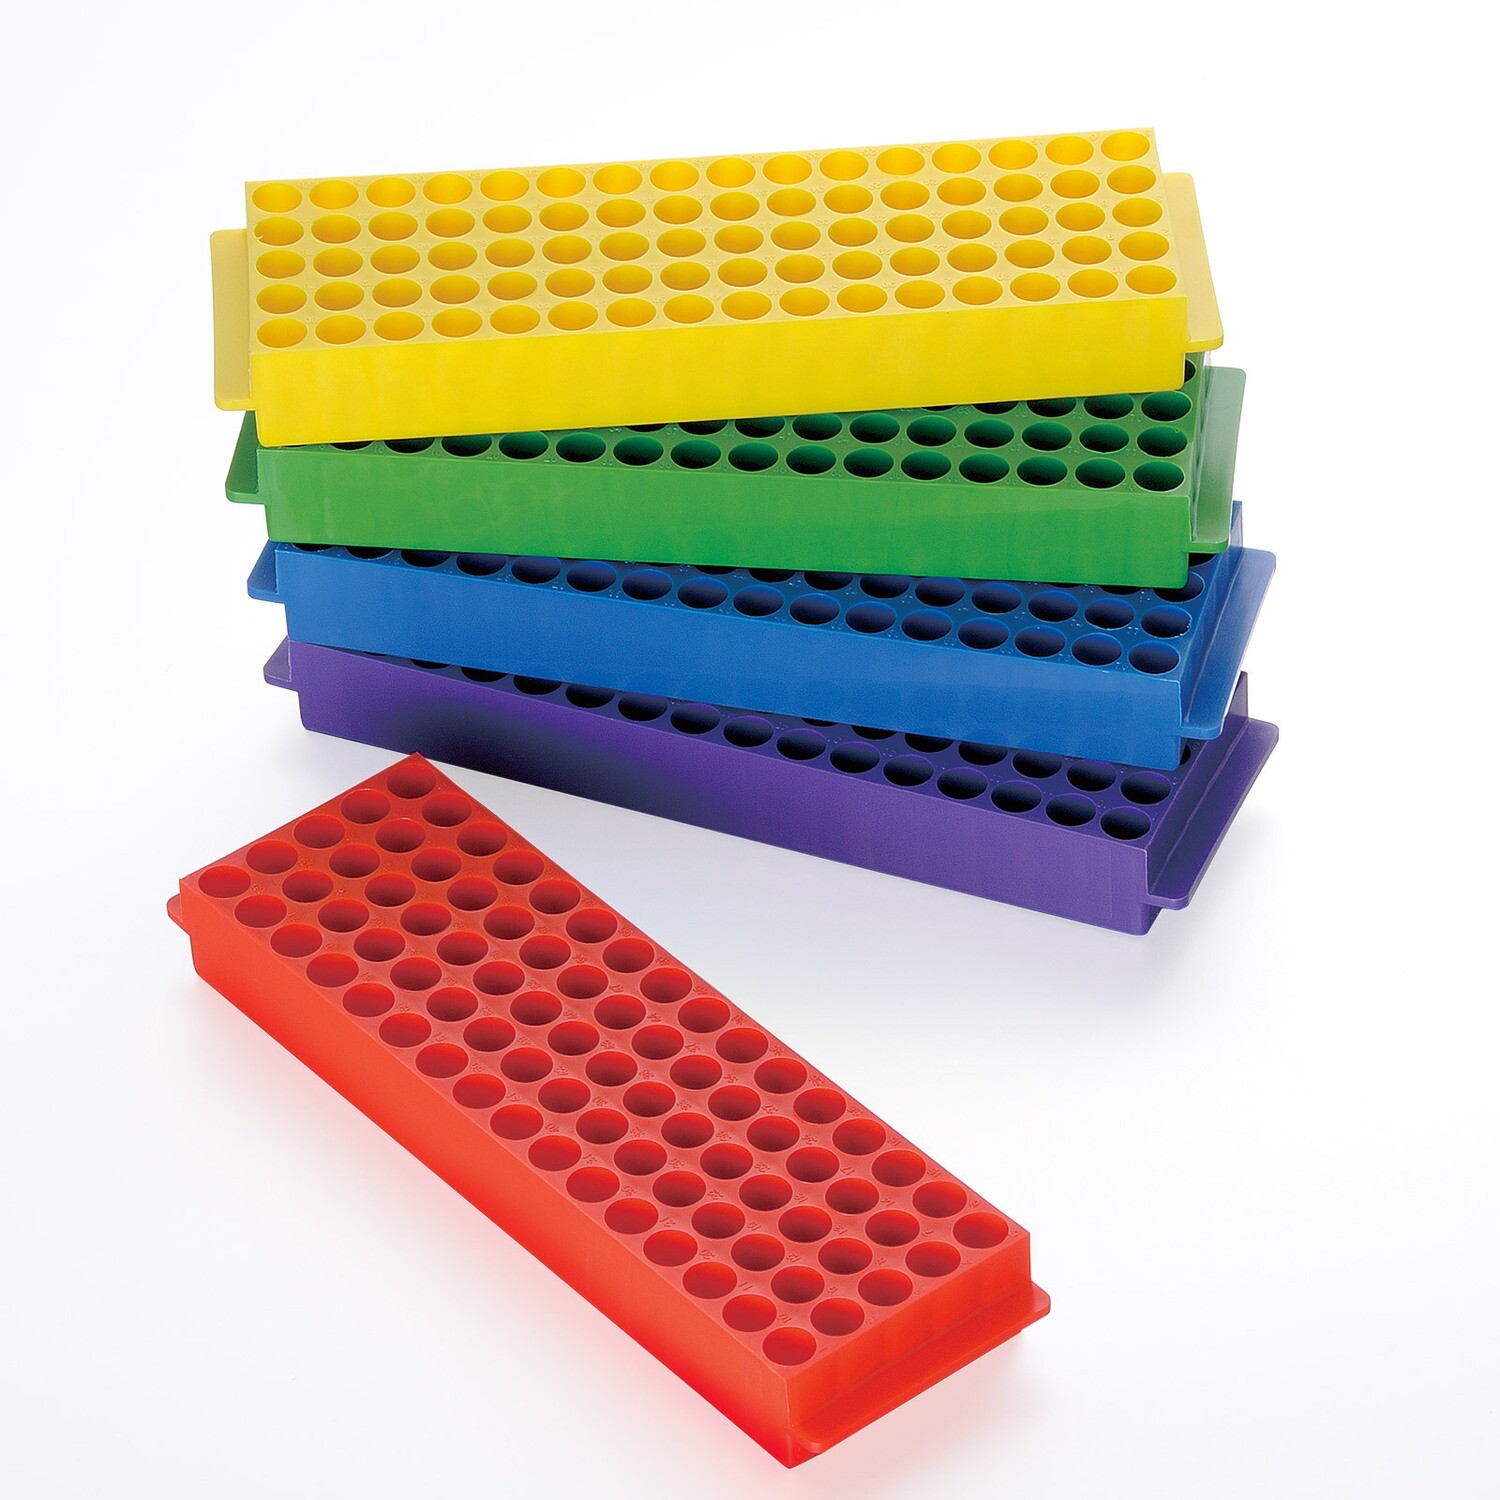 Biologix 80-Well Microcentrifuge Tube Rack, Assorted Colors, 5/Bag, 4 Bags/Case